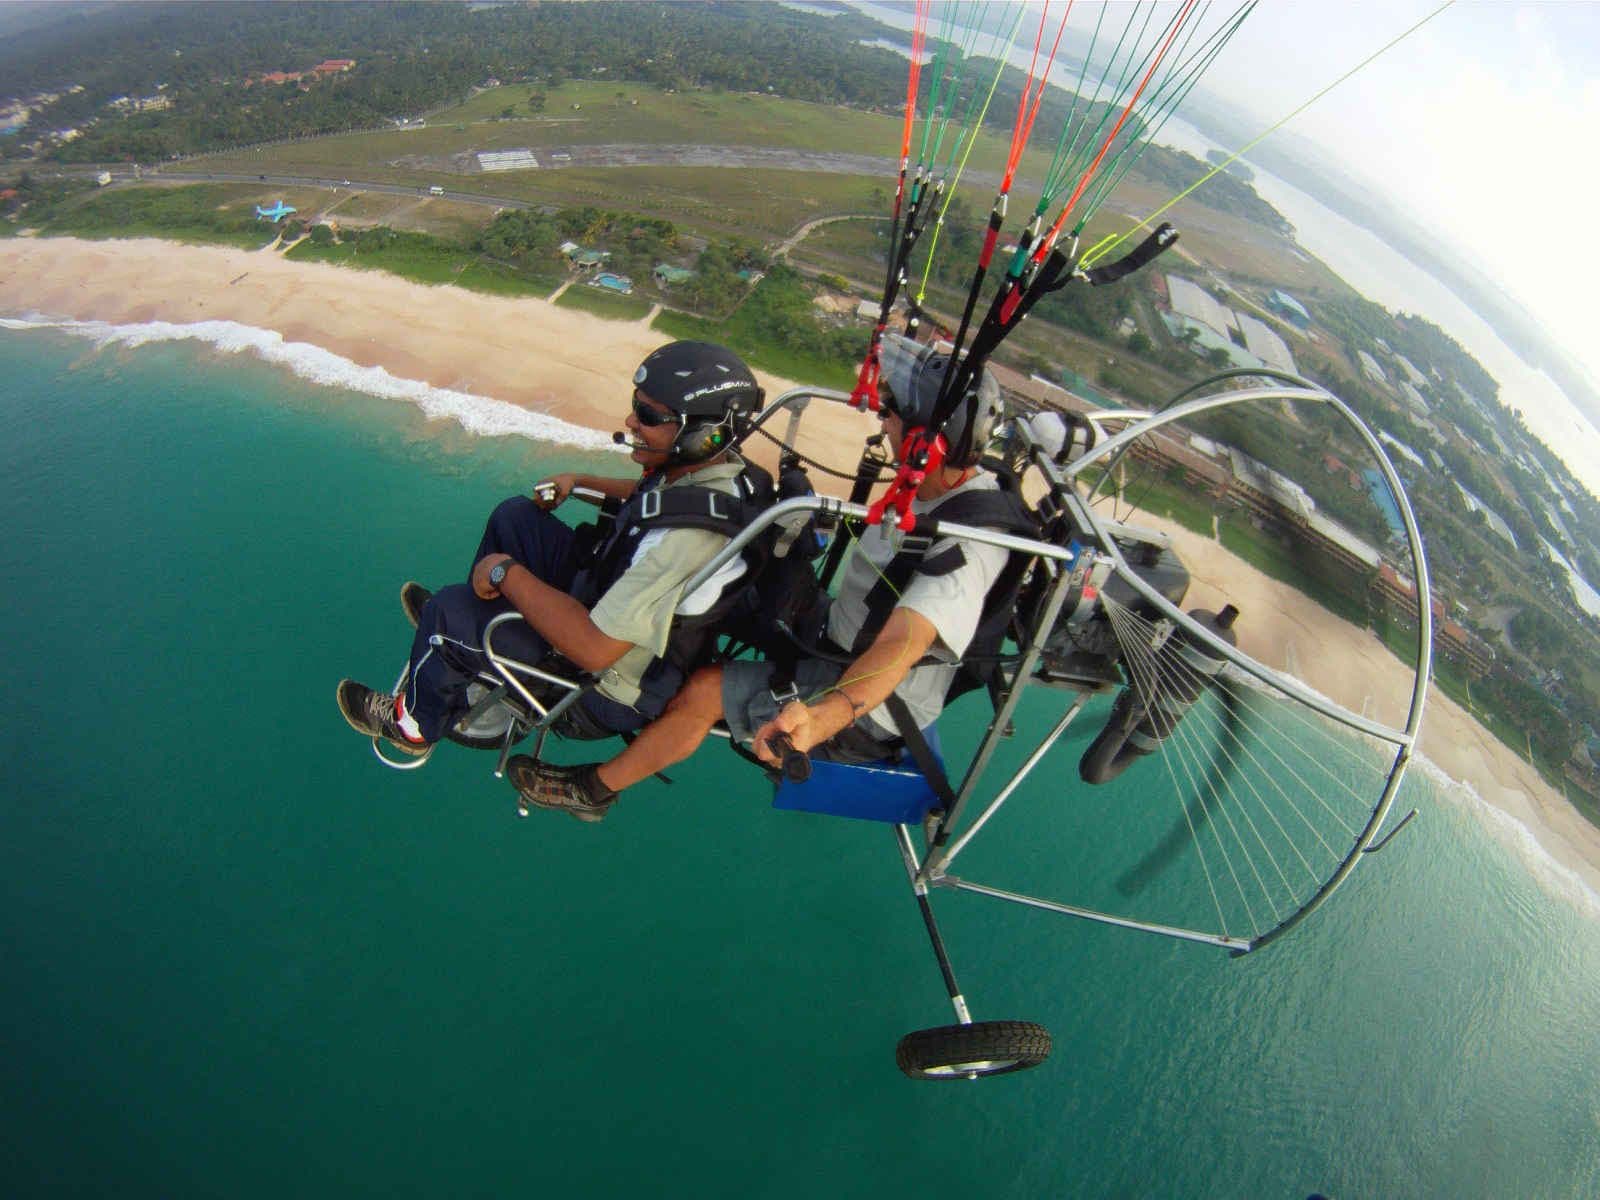 The men fly like a bird in Bentota coast and experience inland, coastal landscapes in bird eye